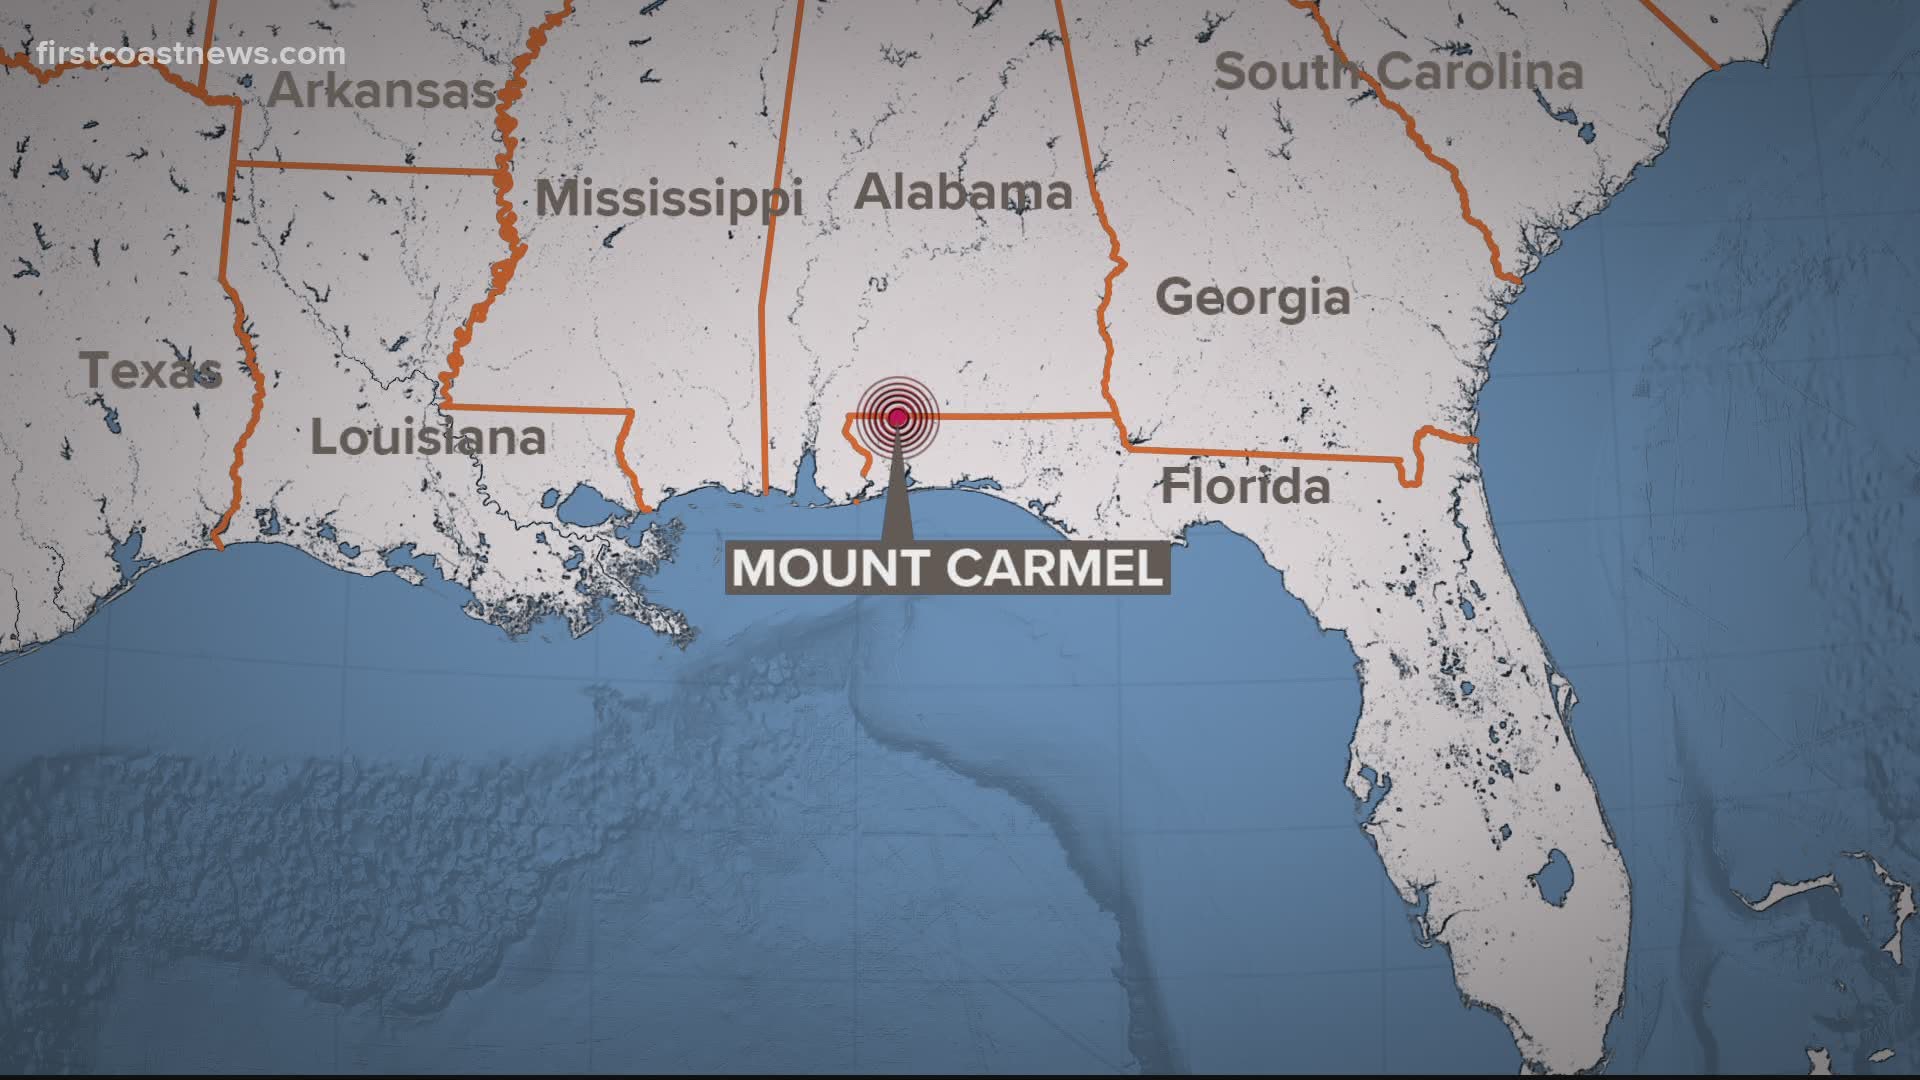 The USGS says the earthquake was centered 3 km northwest of Mount Carmel at a depth of 10 km. It happened at 11:07 a.m. Eastern Daylight Time.